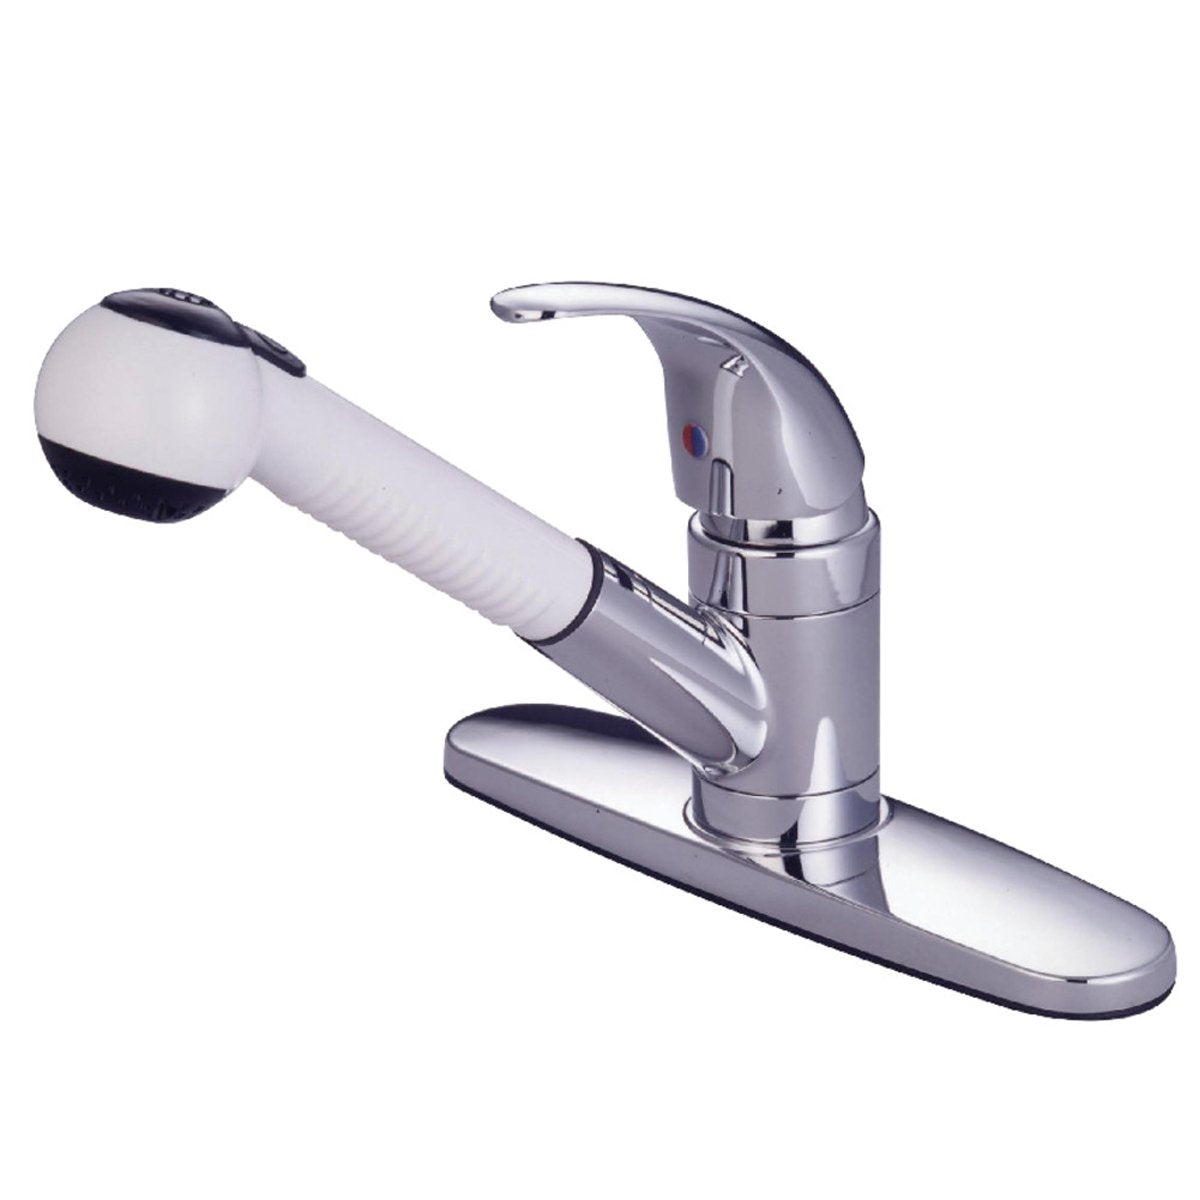 Kingston Brass Legacy Pull-Out Kitchen Faucet